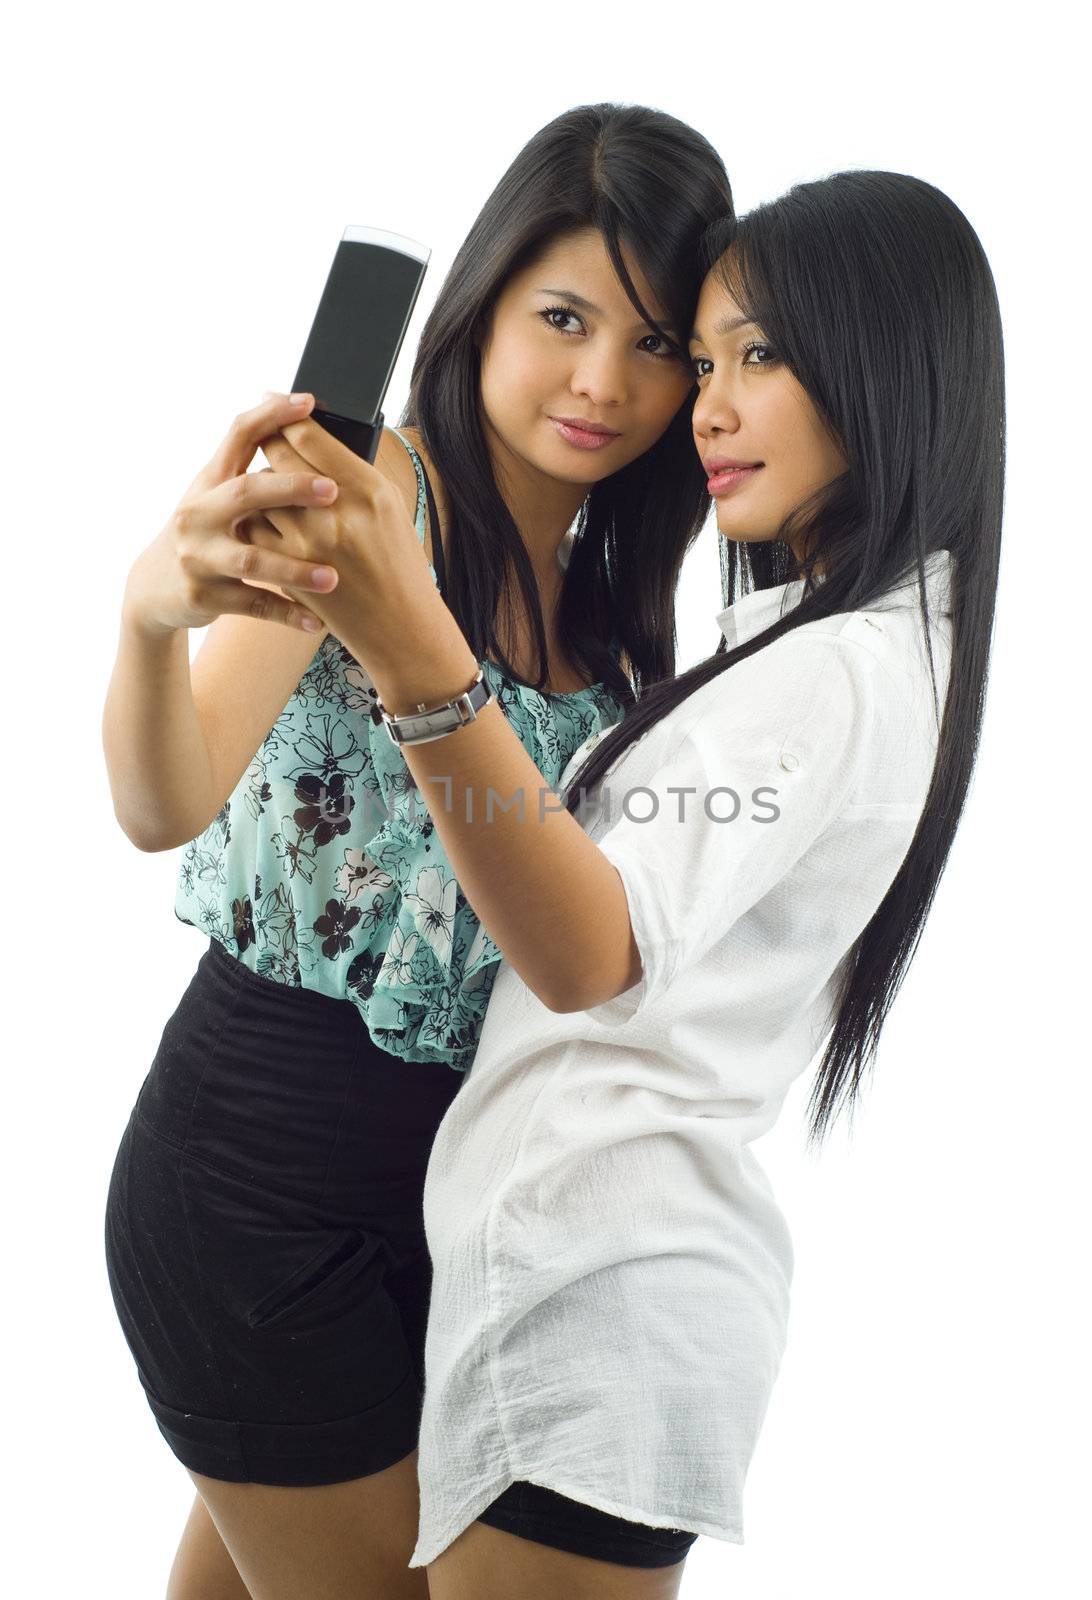 two asian women taking a picture of themselves with a mobile phone, isolated on white